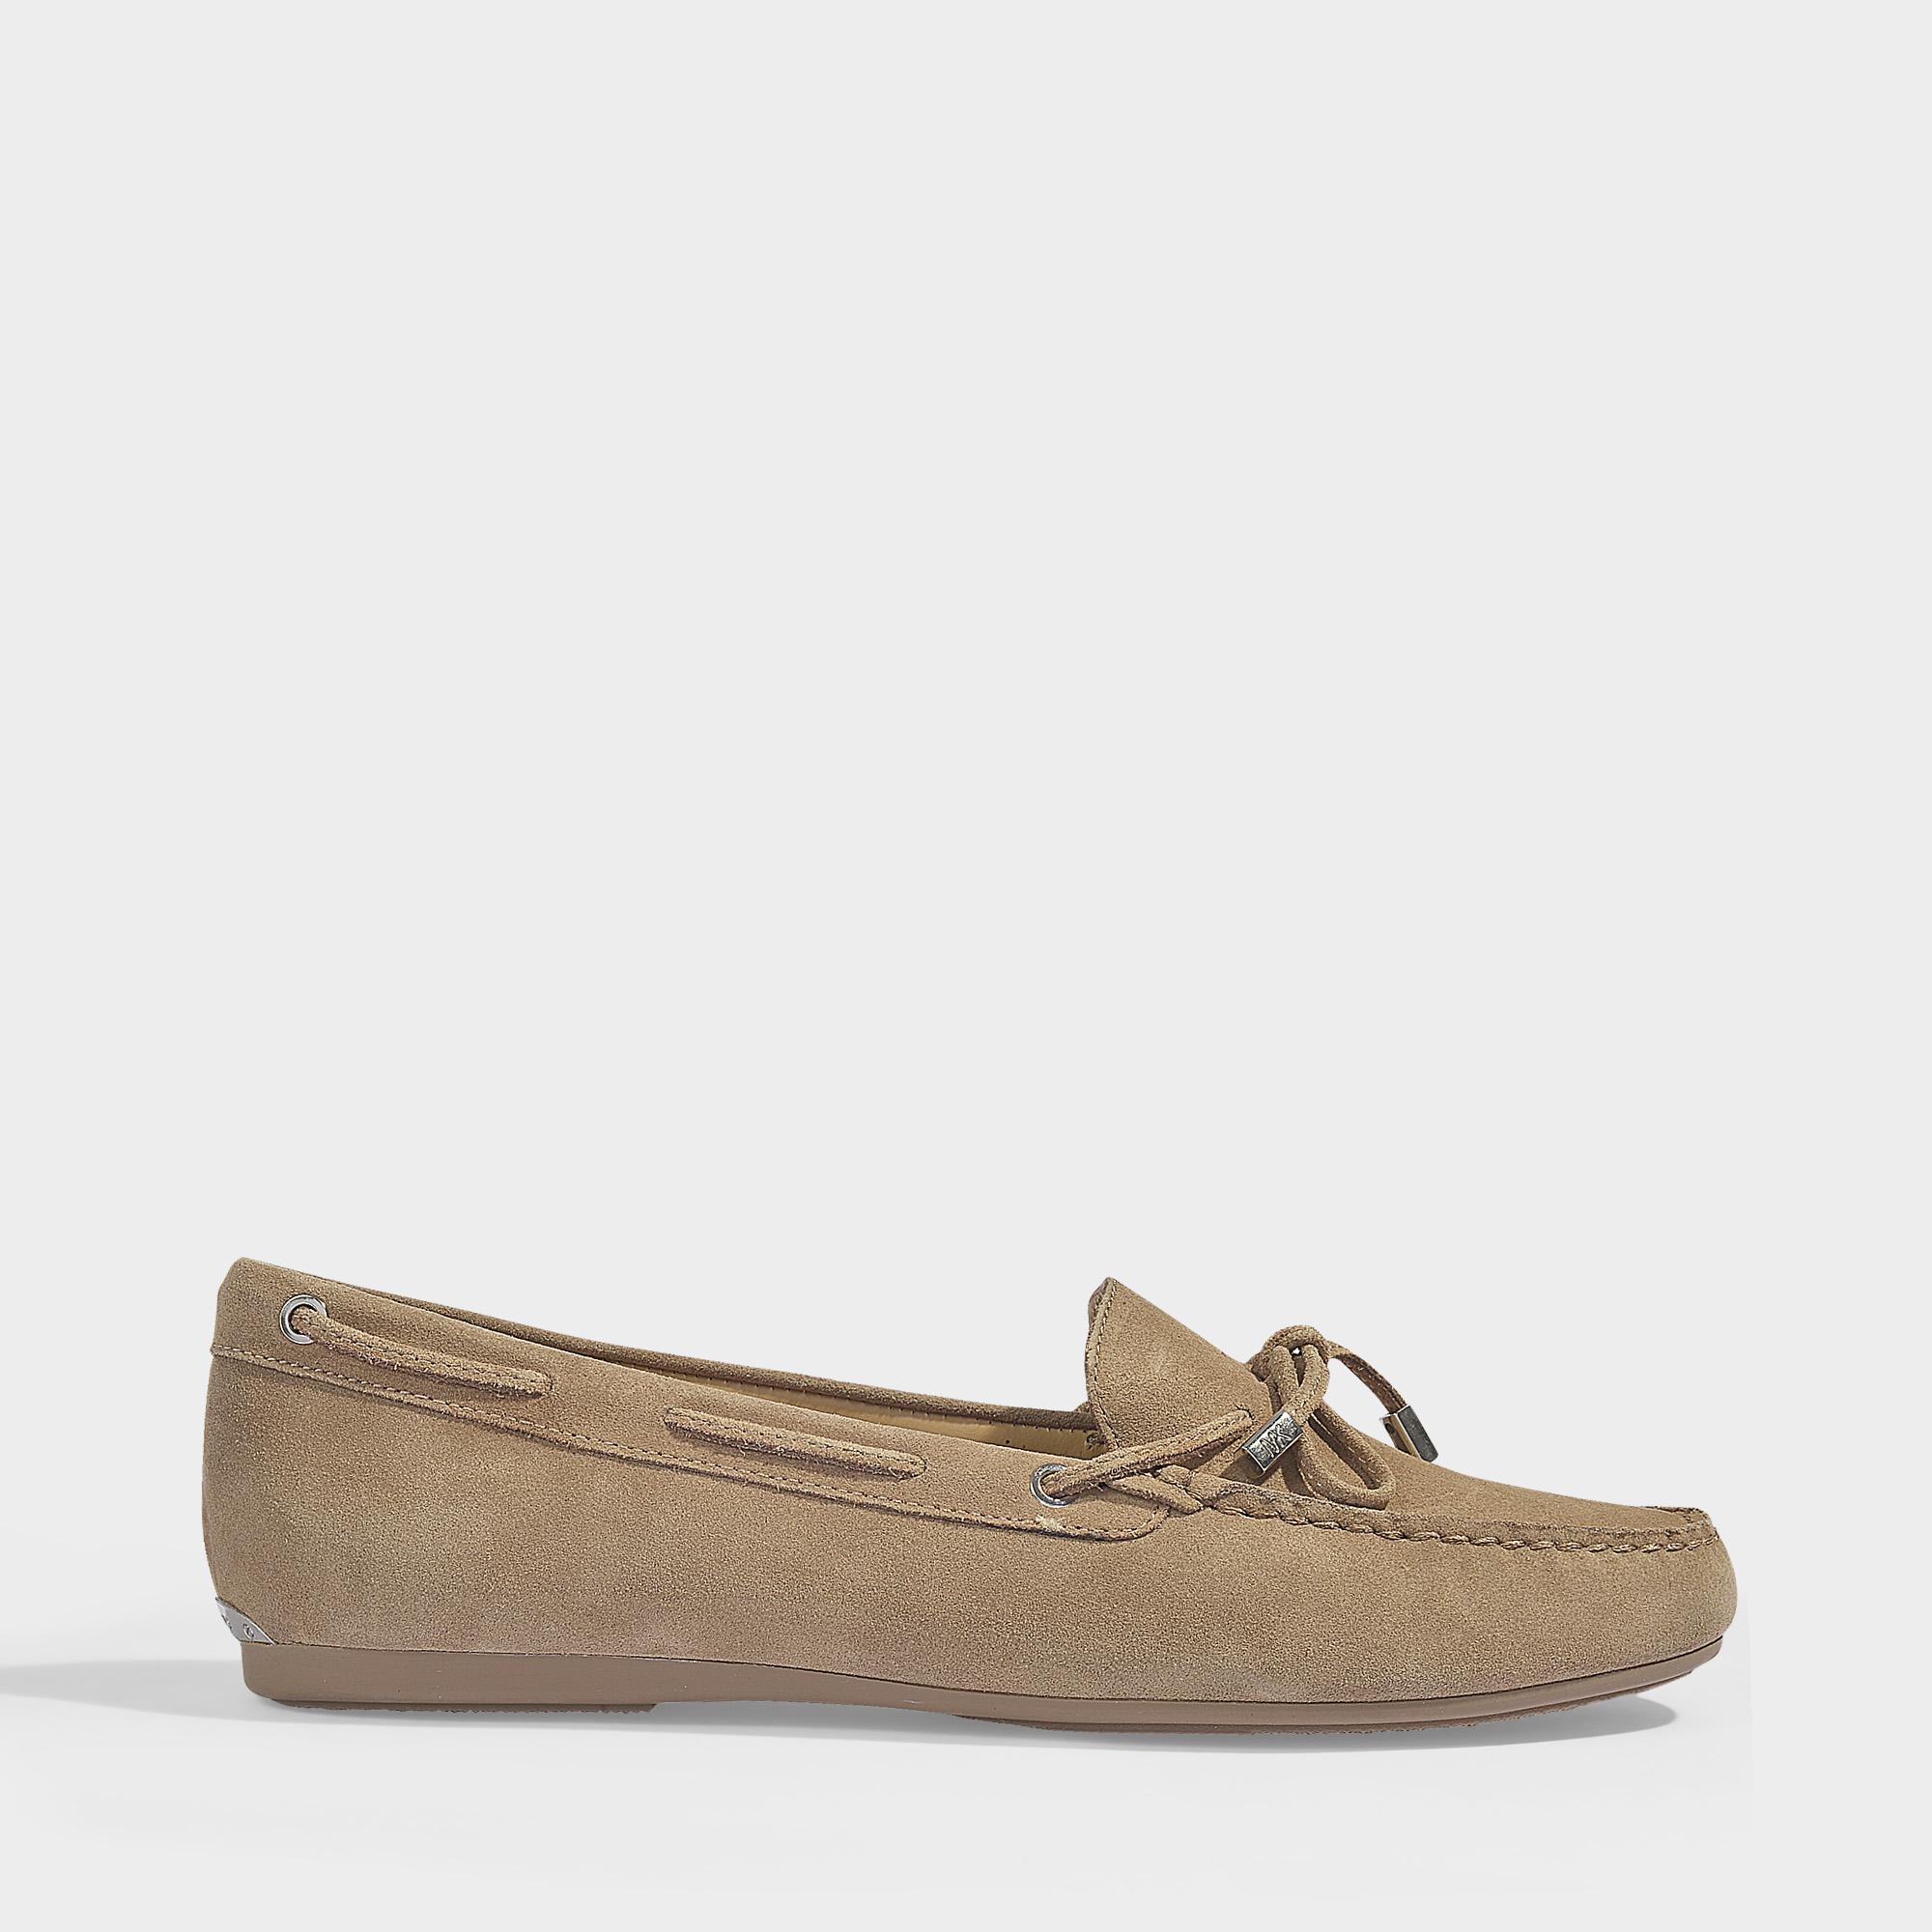 Doe mee Overleven Effectief MICHAEL Michael Kors Sutton Moc Loafers In Warm Taupe Sport Suede in Brown  | Lyst